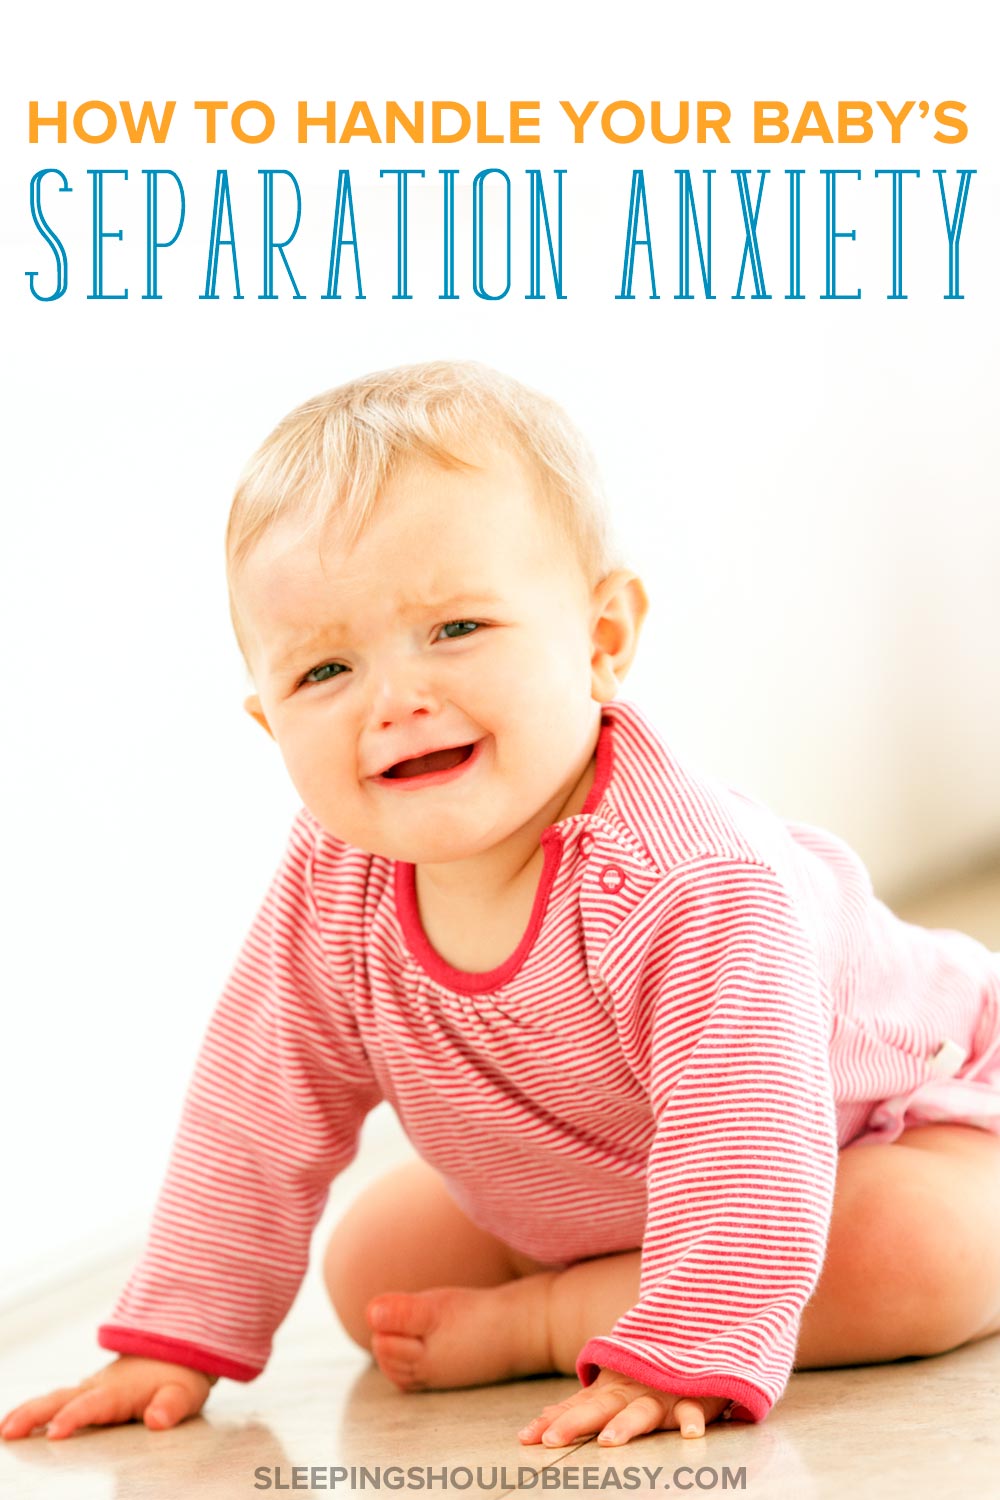 Effective Tips to Gently Handle Separation Anxiety in Babies